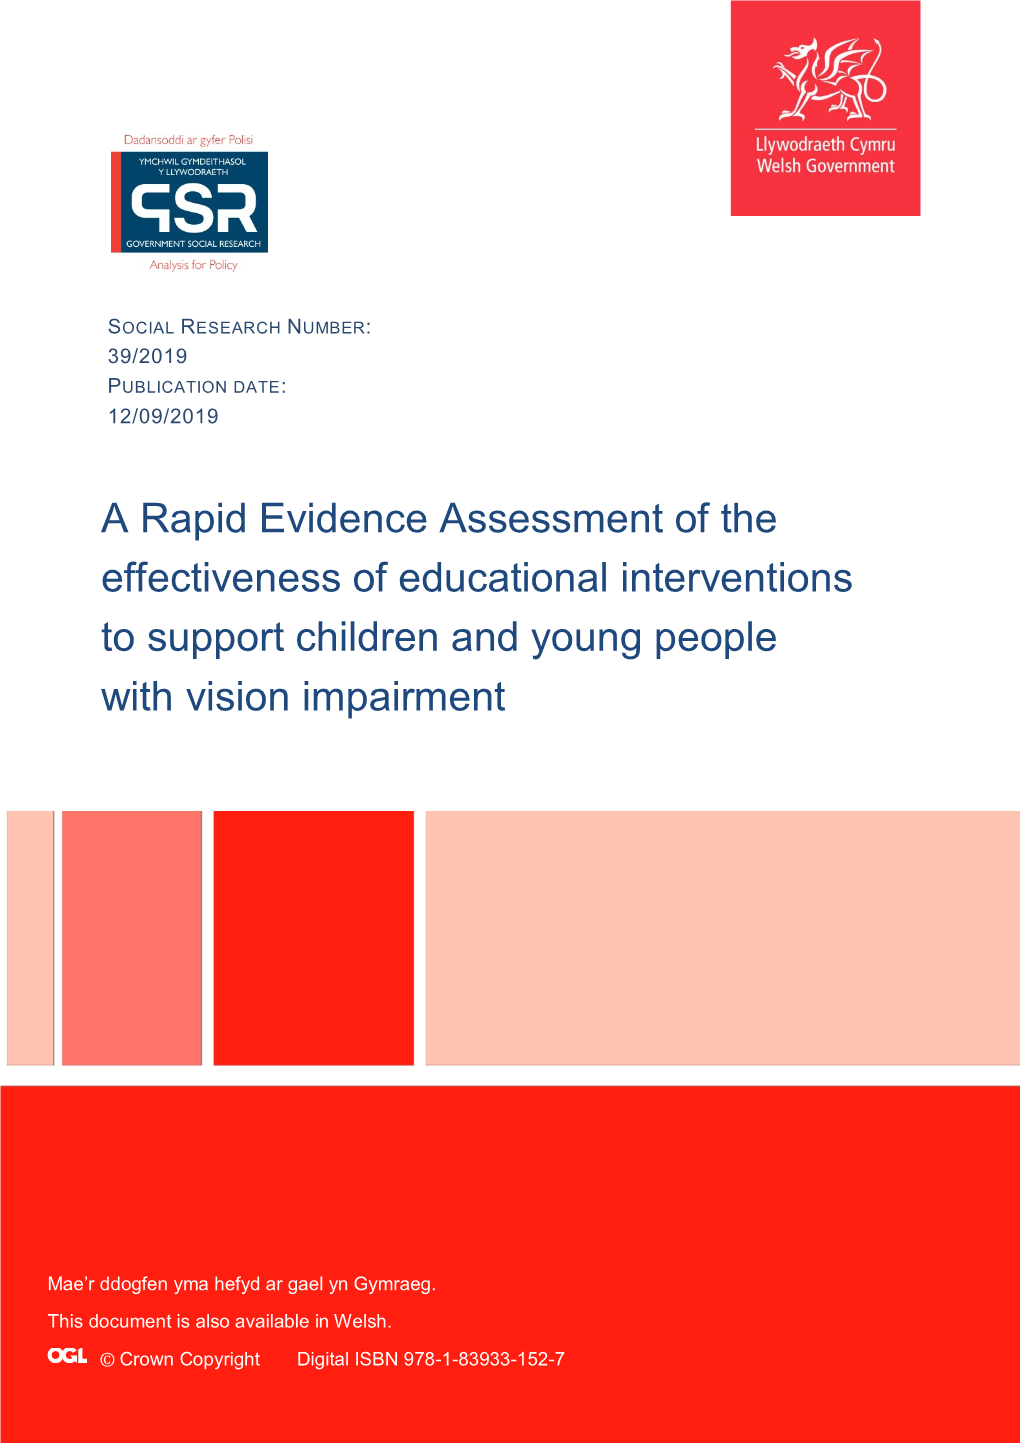 A Rapid Evidence Assessment of the Effectiveness of Educational Interventions to Support Children and Young People with Vision Impairment